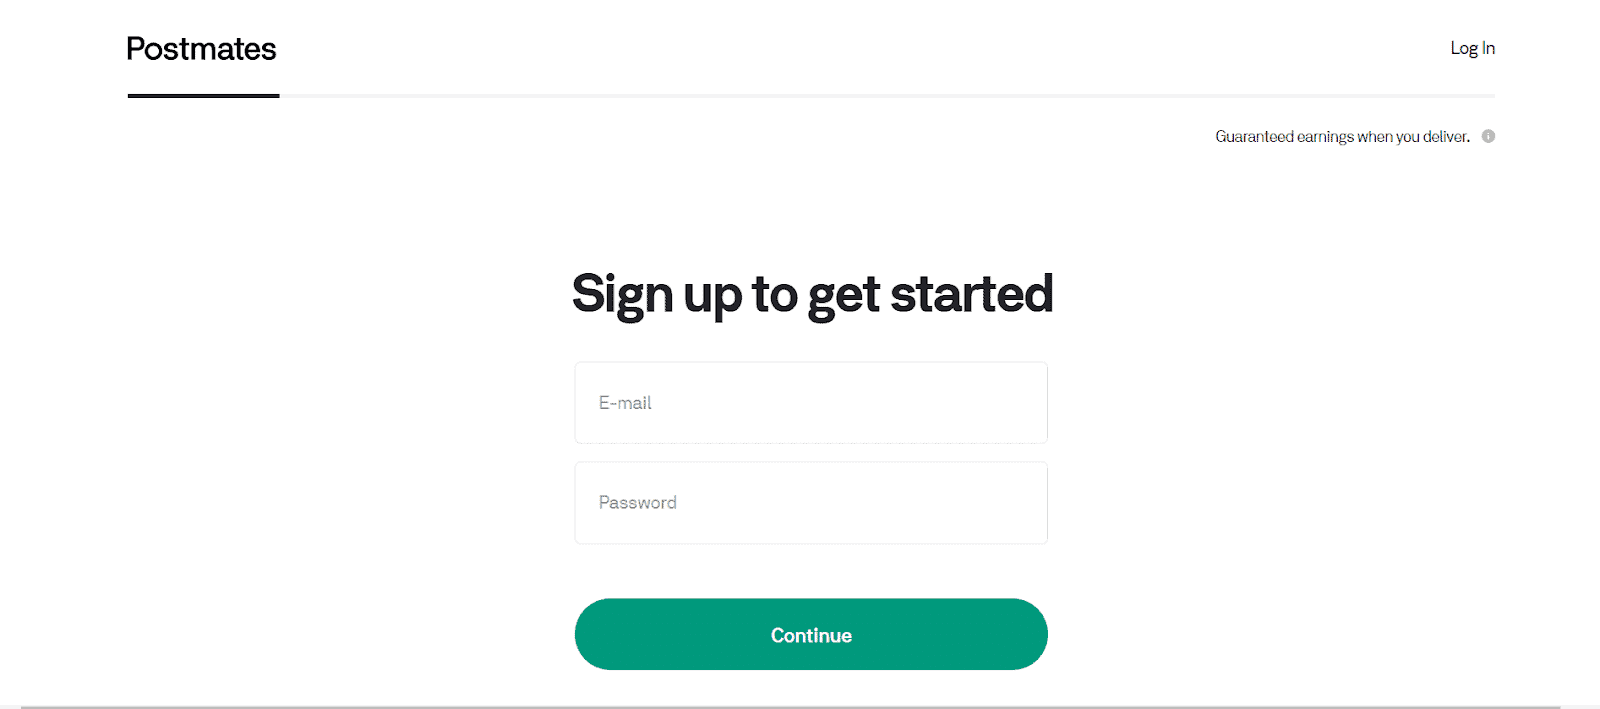 The sign up page to drive for Postmates